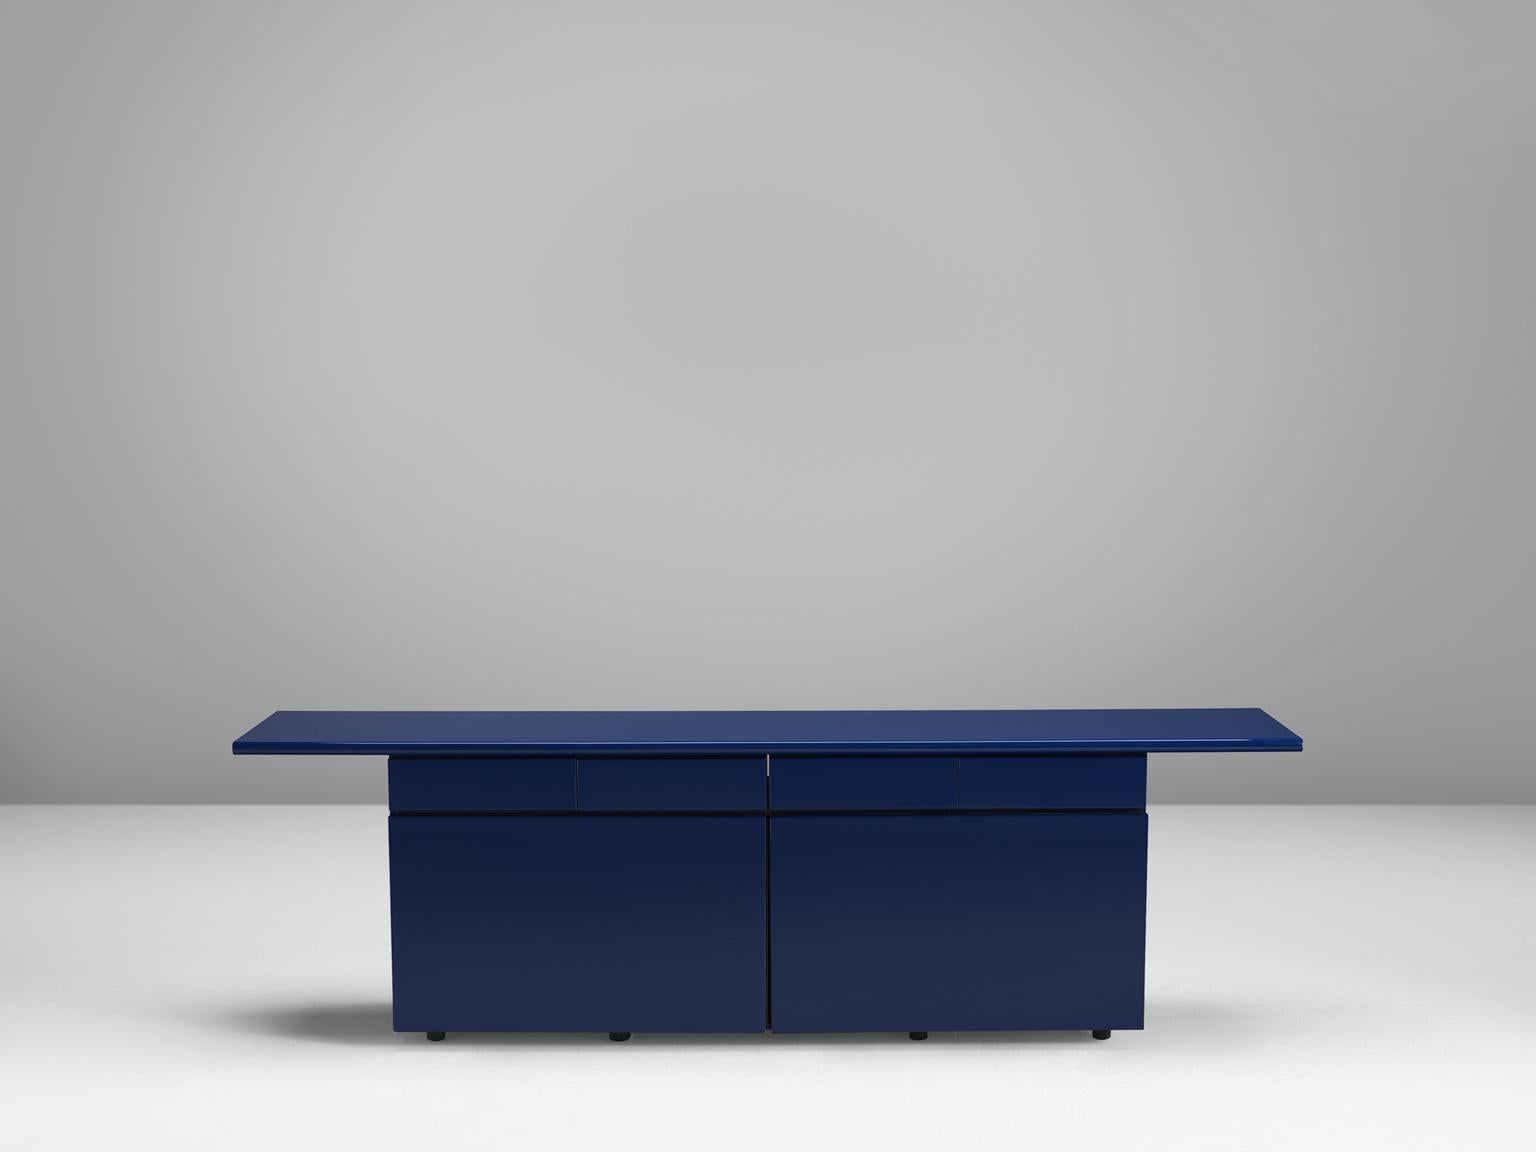 Veneer Giotto Stoppino for Acerbis 'Sheraton' Navy Blue Sideboard, 1979